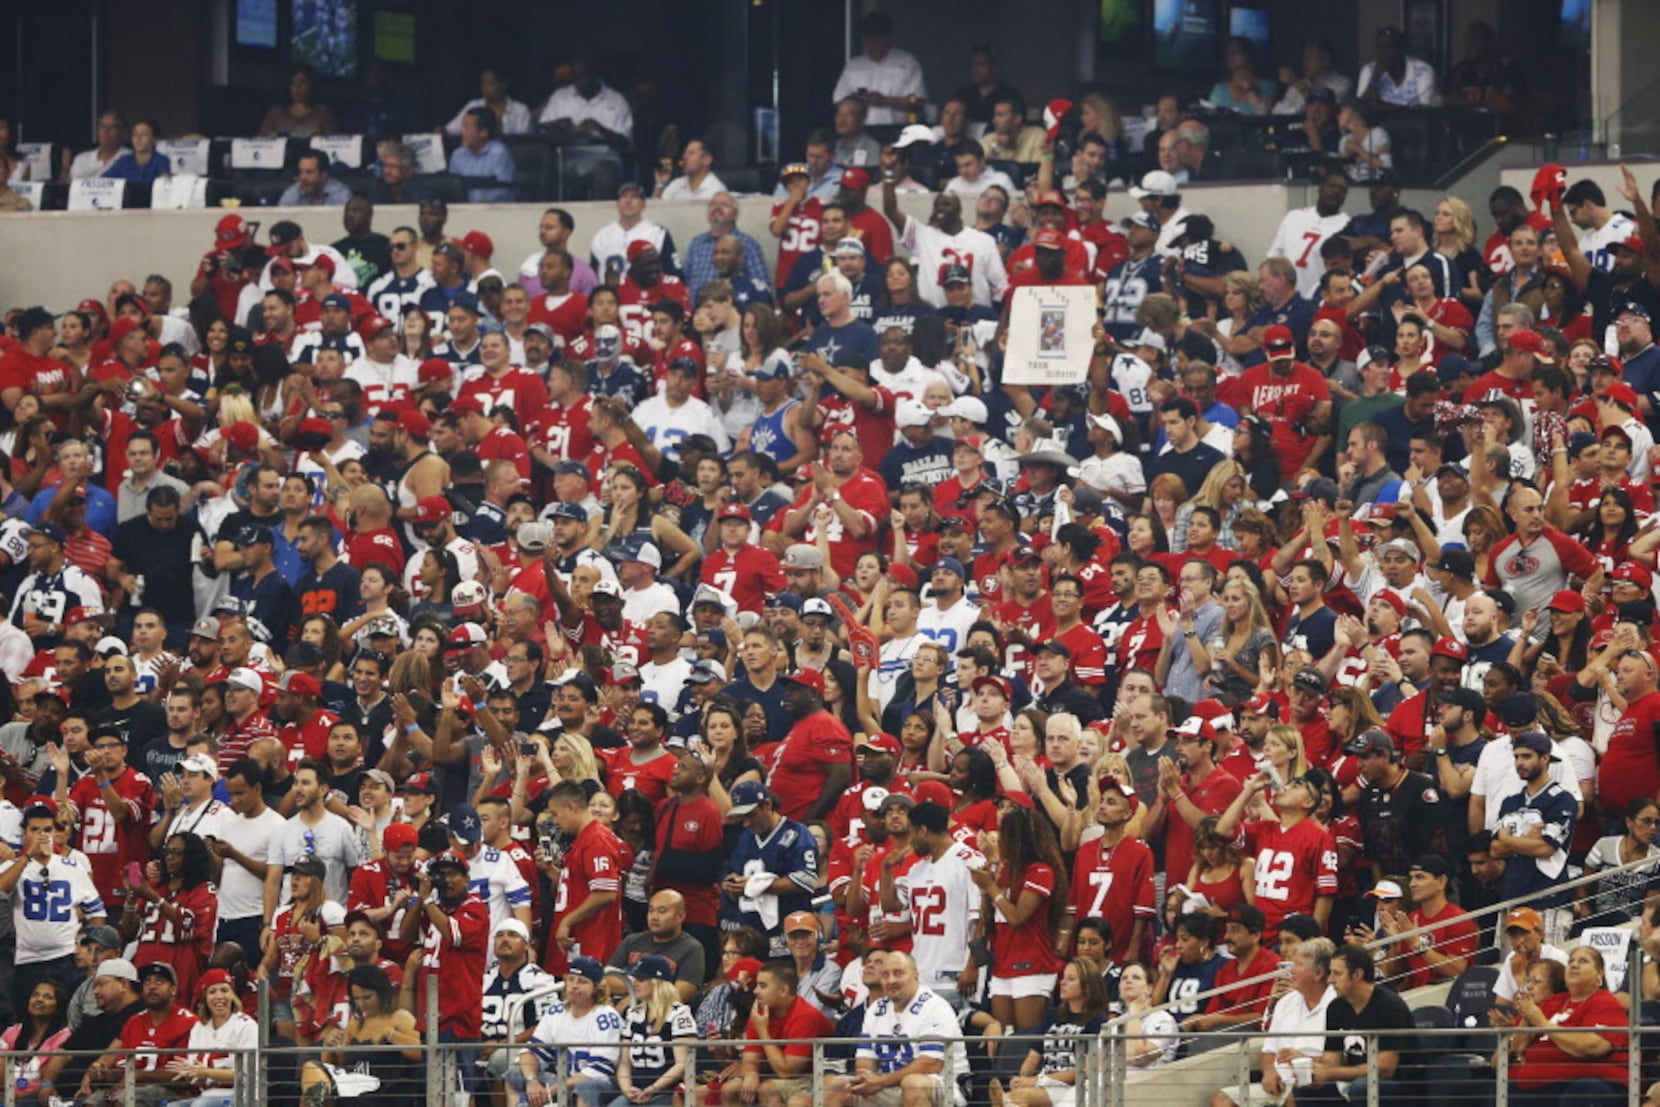 49ers fans take over Los Angeles in win over Rams